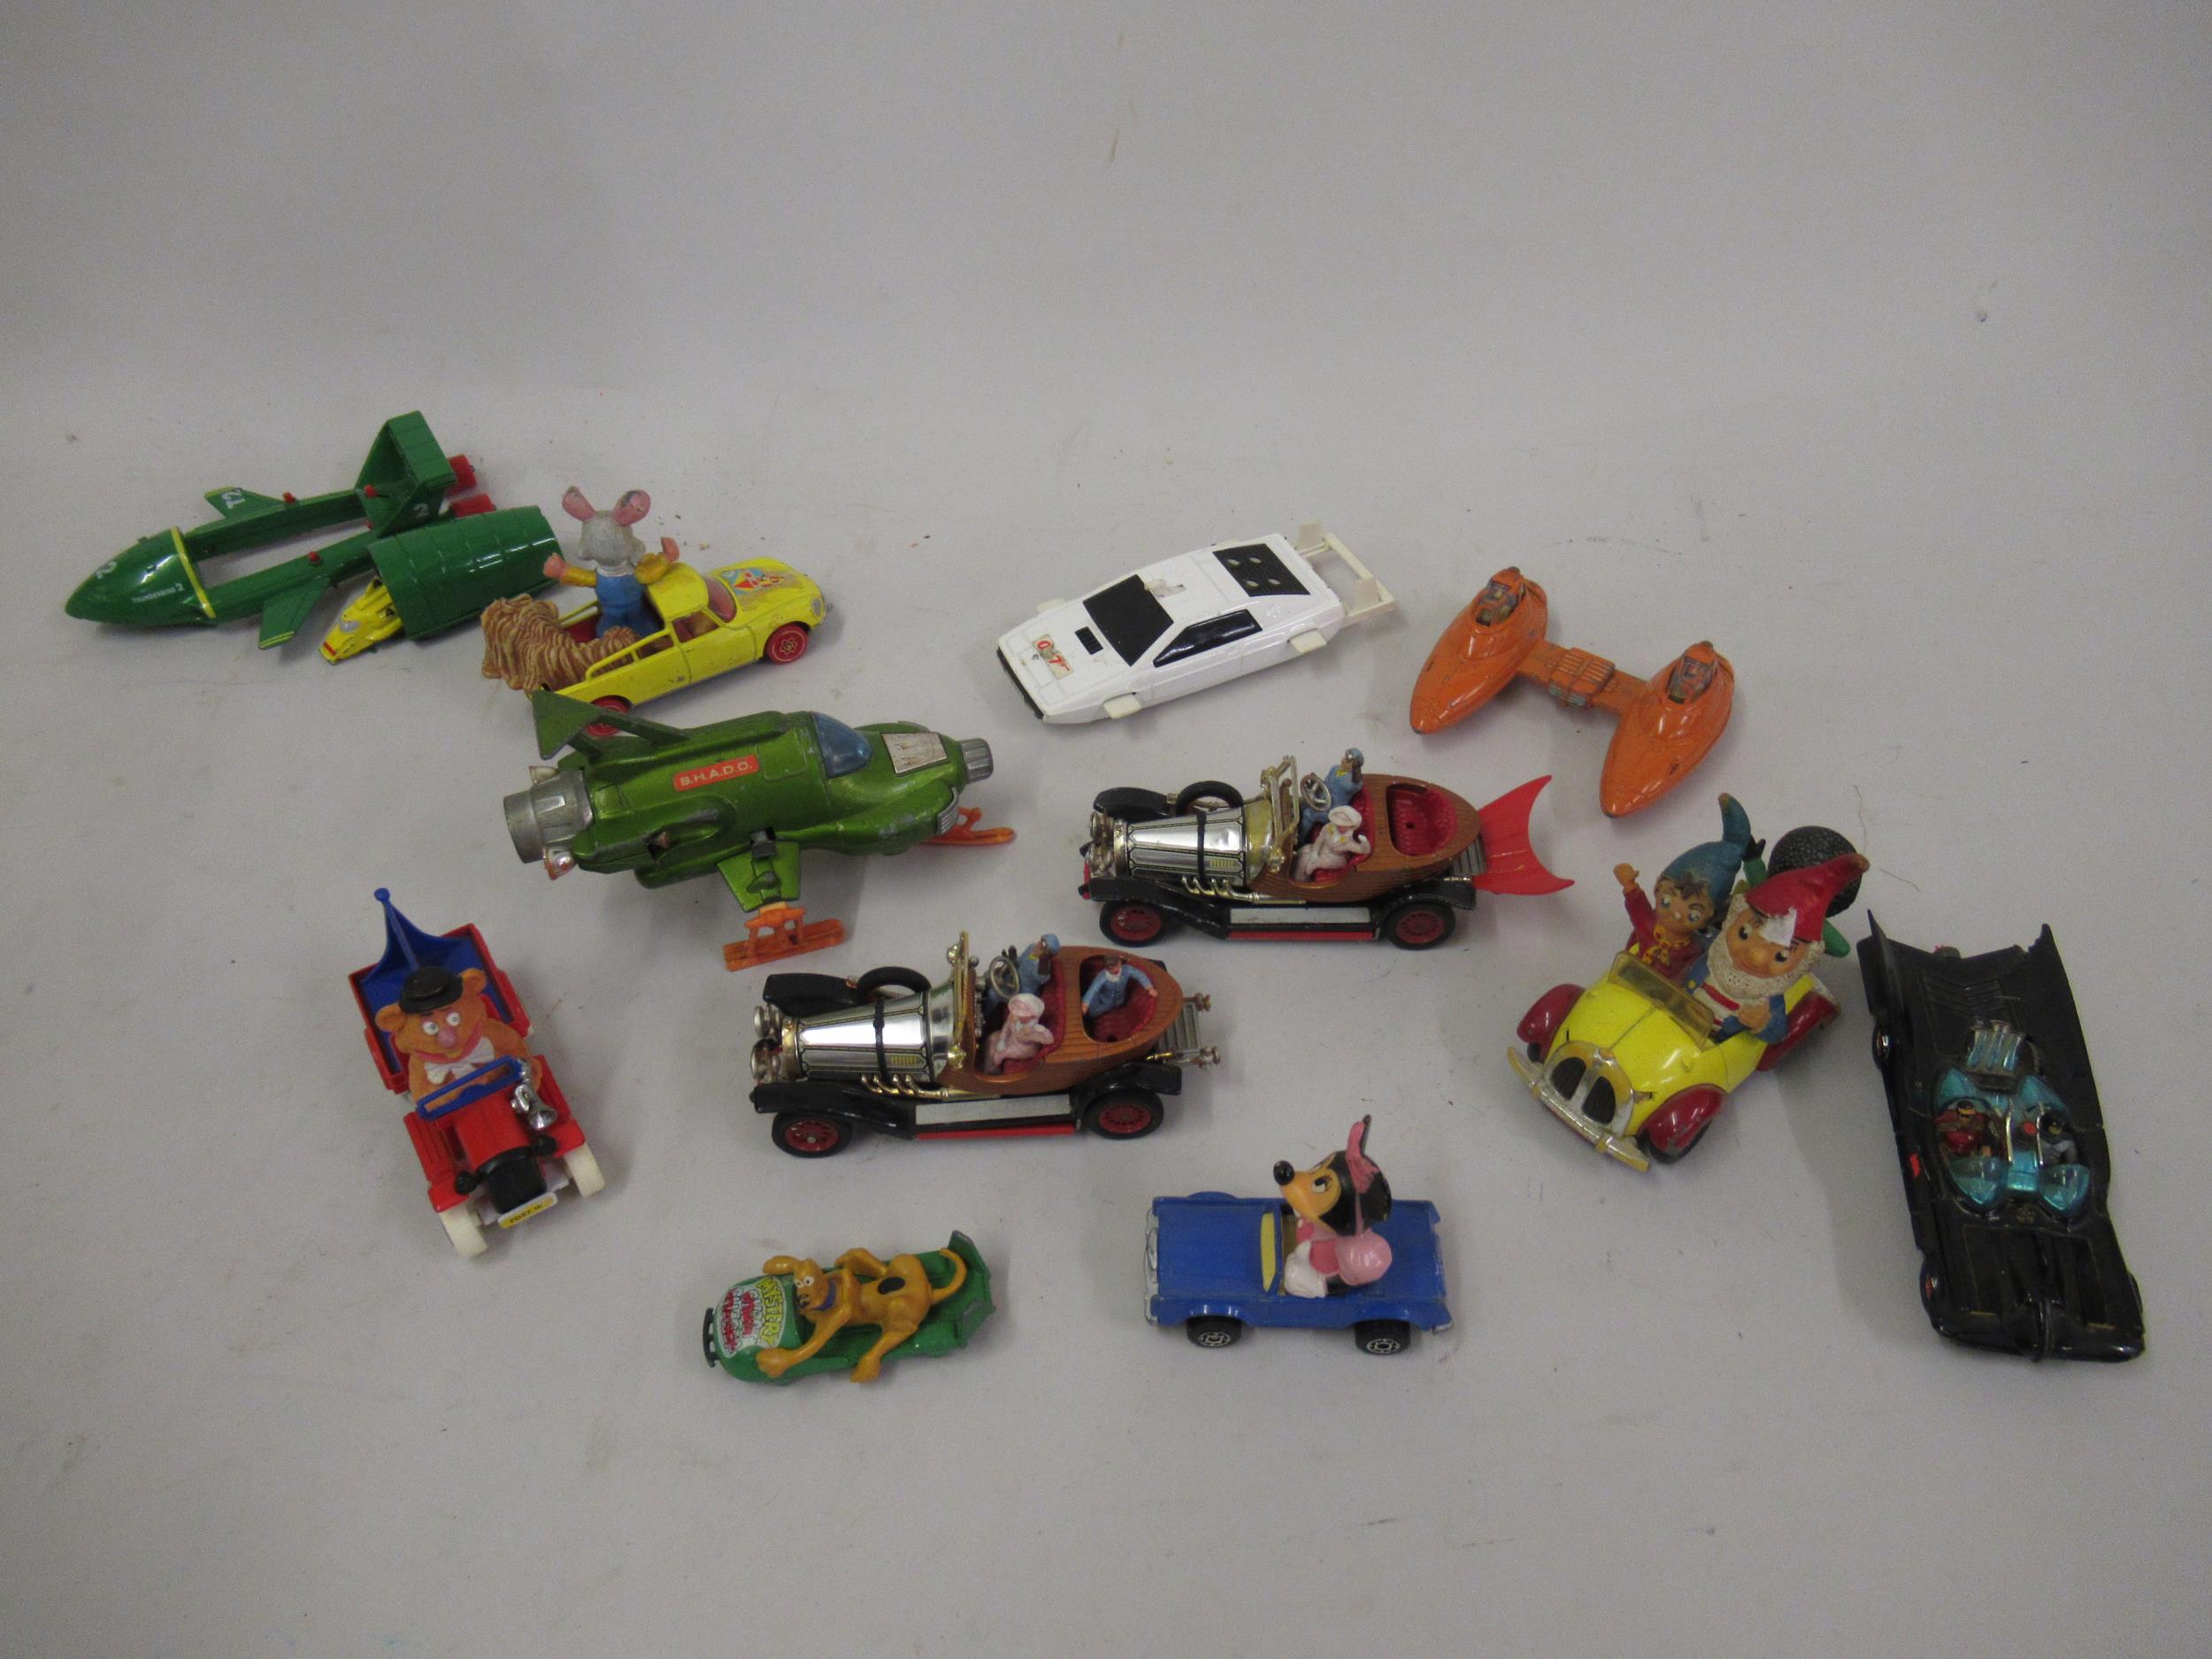 Quantity of TV and film related diecast metal vehicles including Chitty Chitty Bang Bang, Batman and